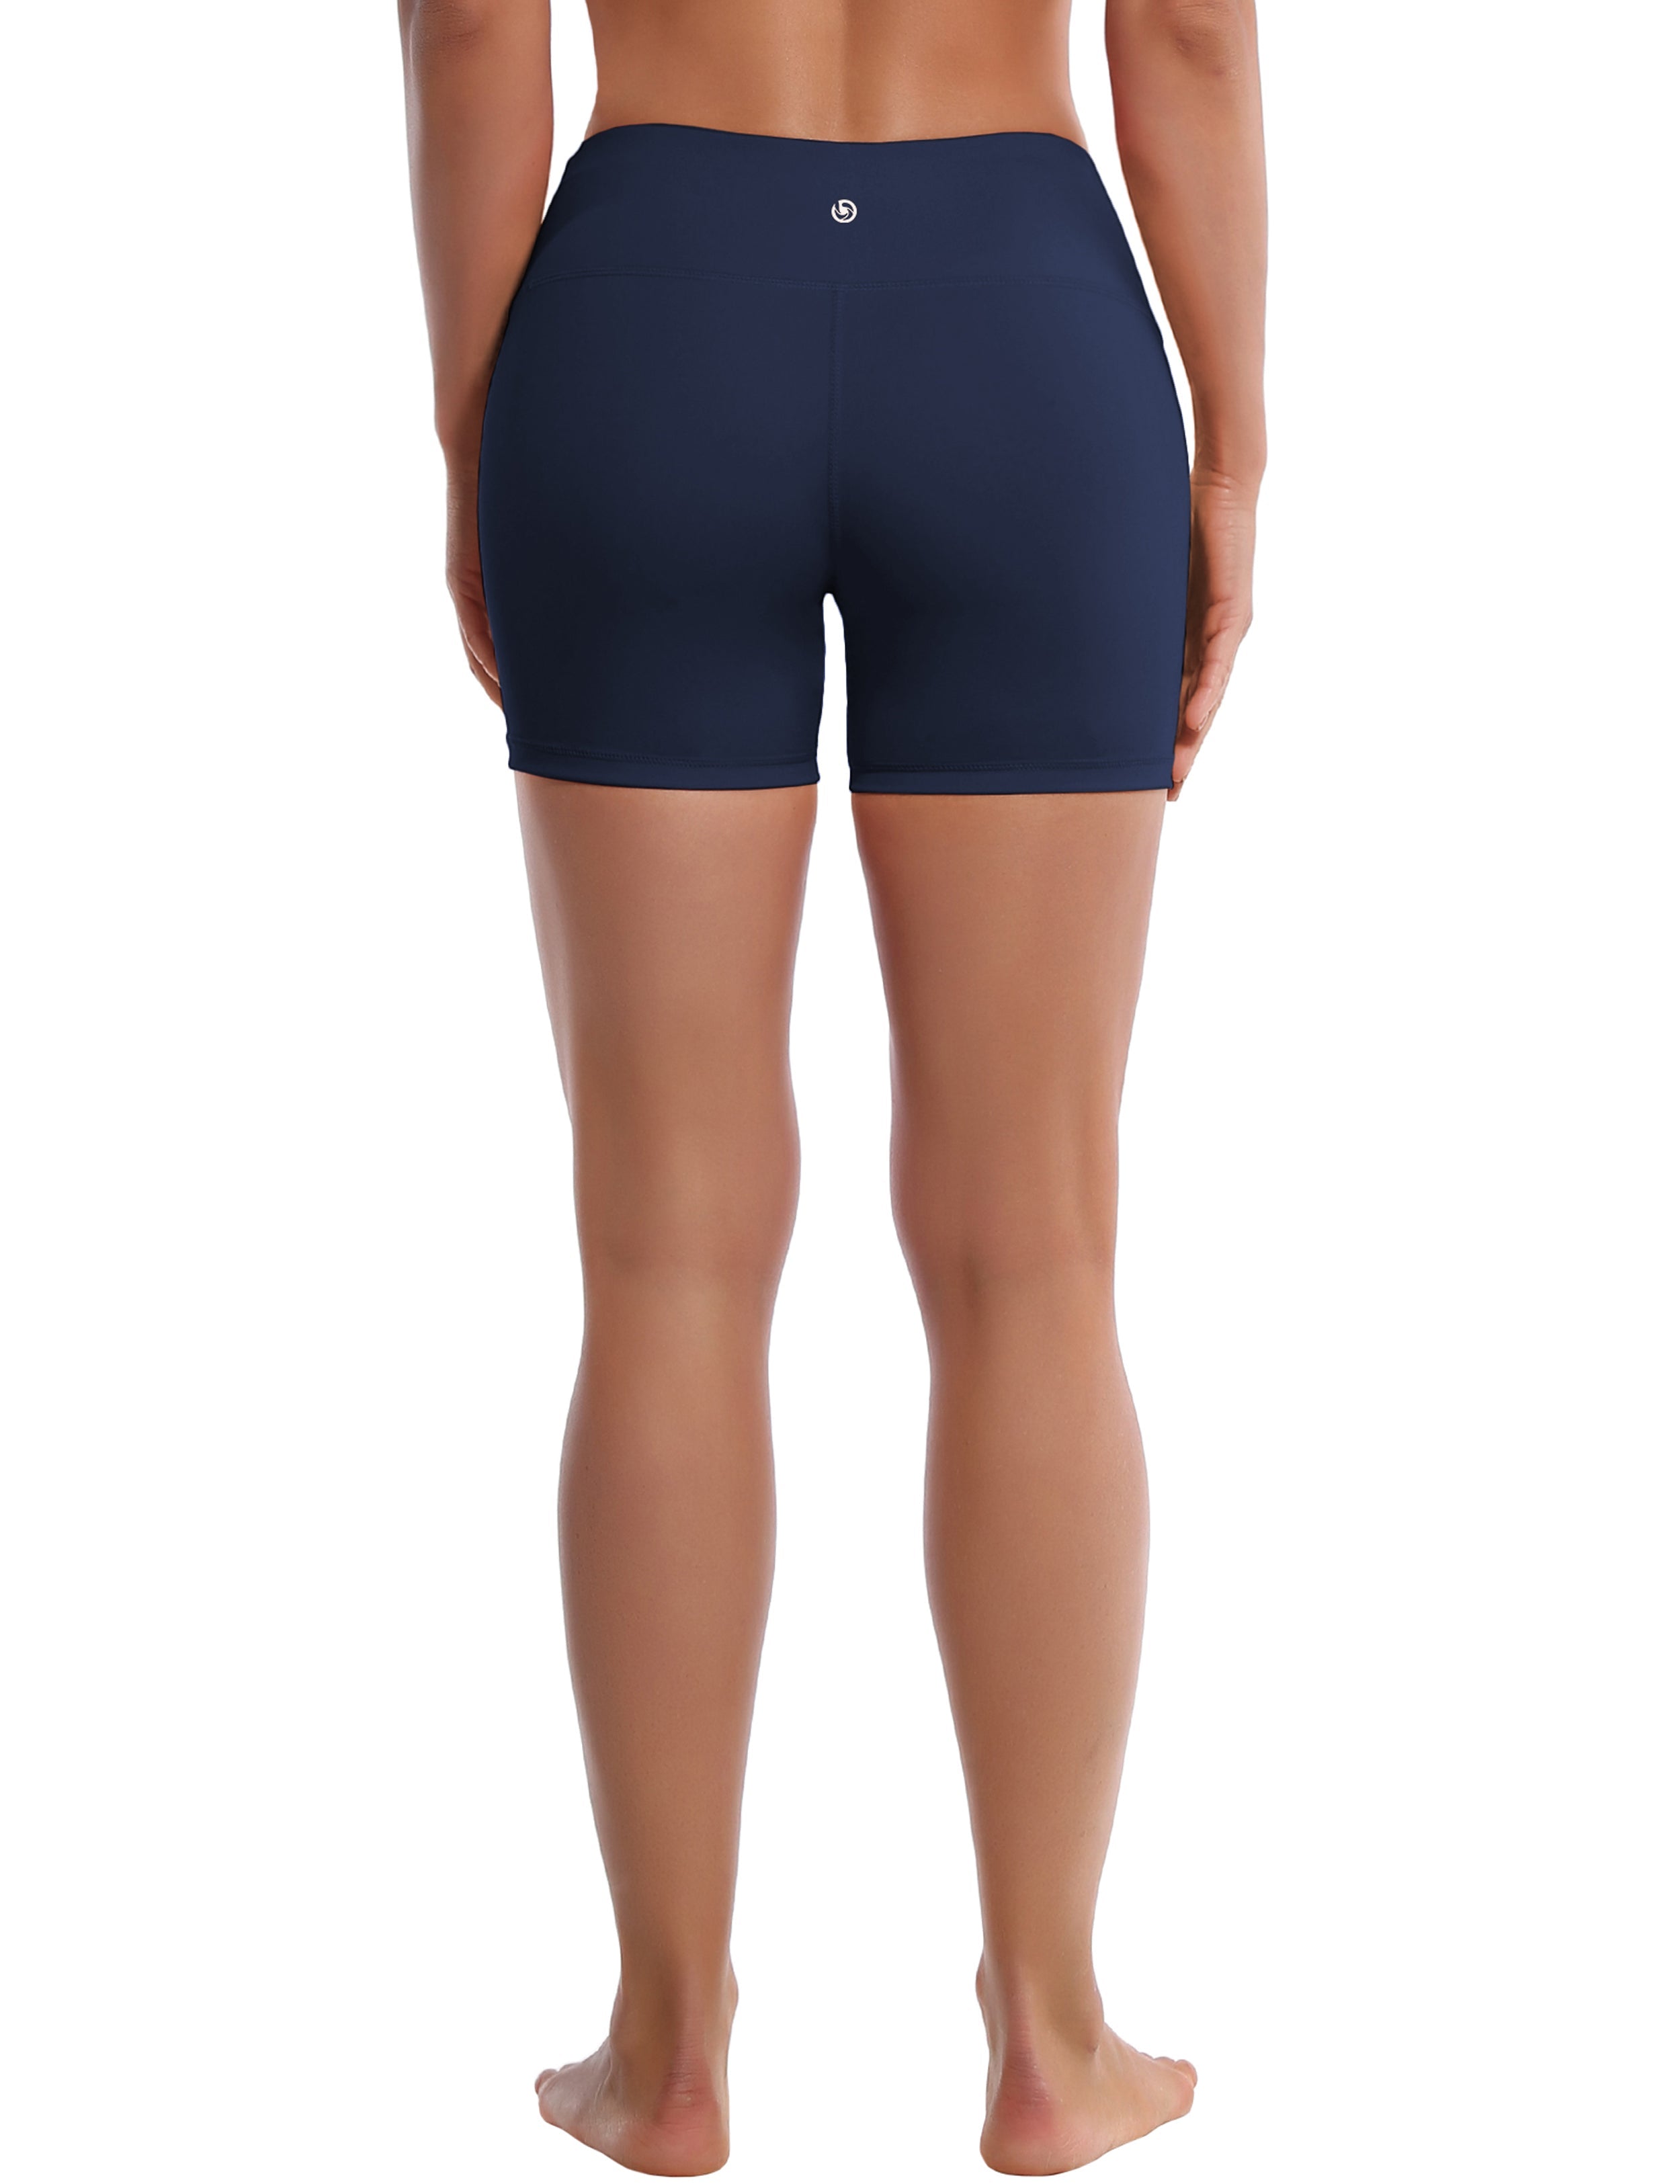 4" Tall Size Shorts darknavy Sleek, soft, smooth and totally comfortable: our newest style is here. Softest-ever fabric High elasticity High density 4-way stretch Fabric doesn't attract lint easily No see-through Moisture-wicking Machine wash 75% Nylon, 25% Spandex